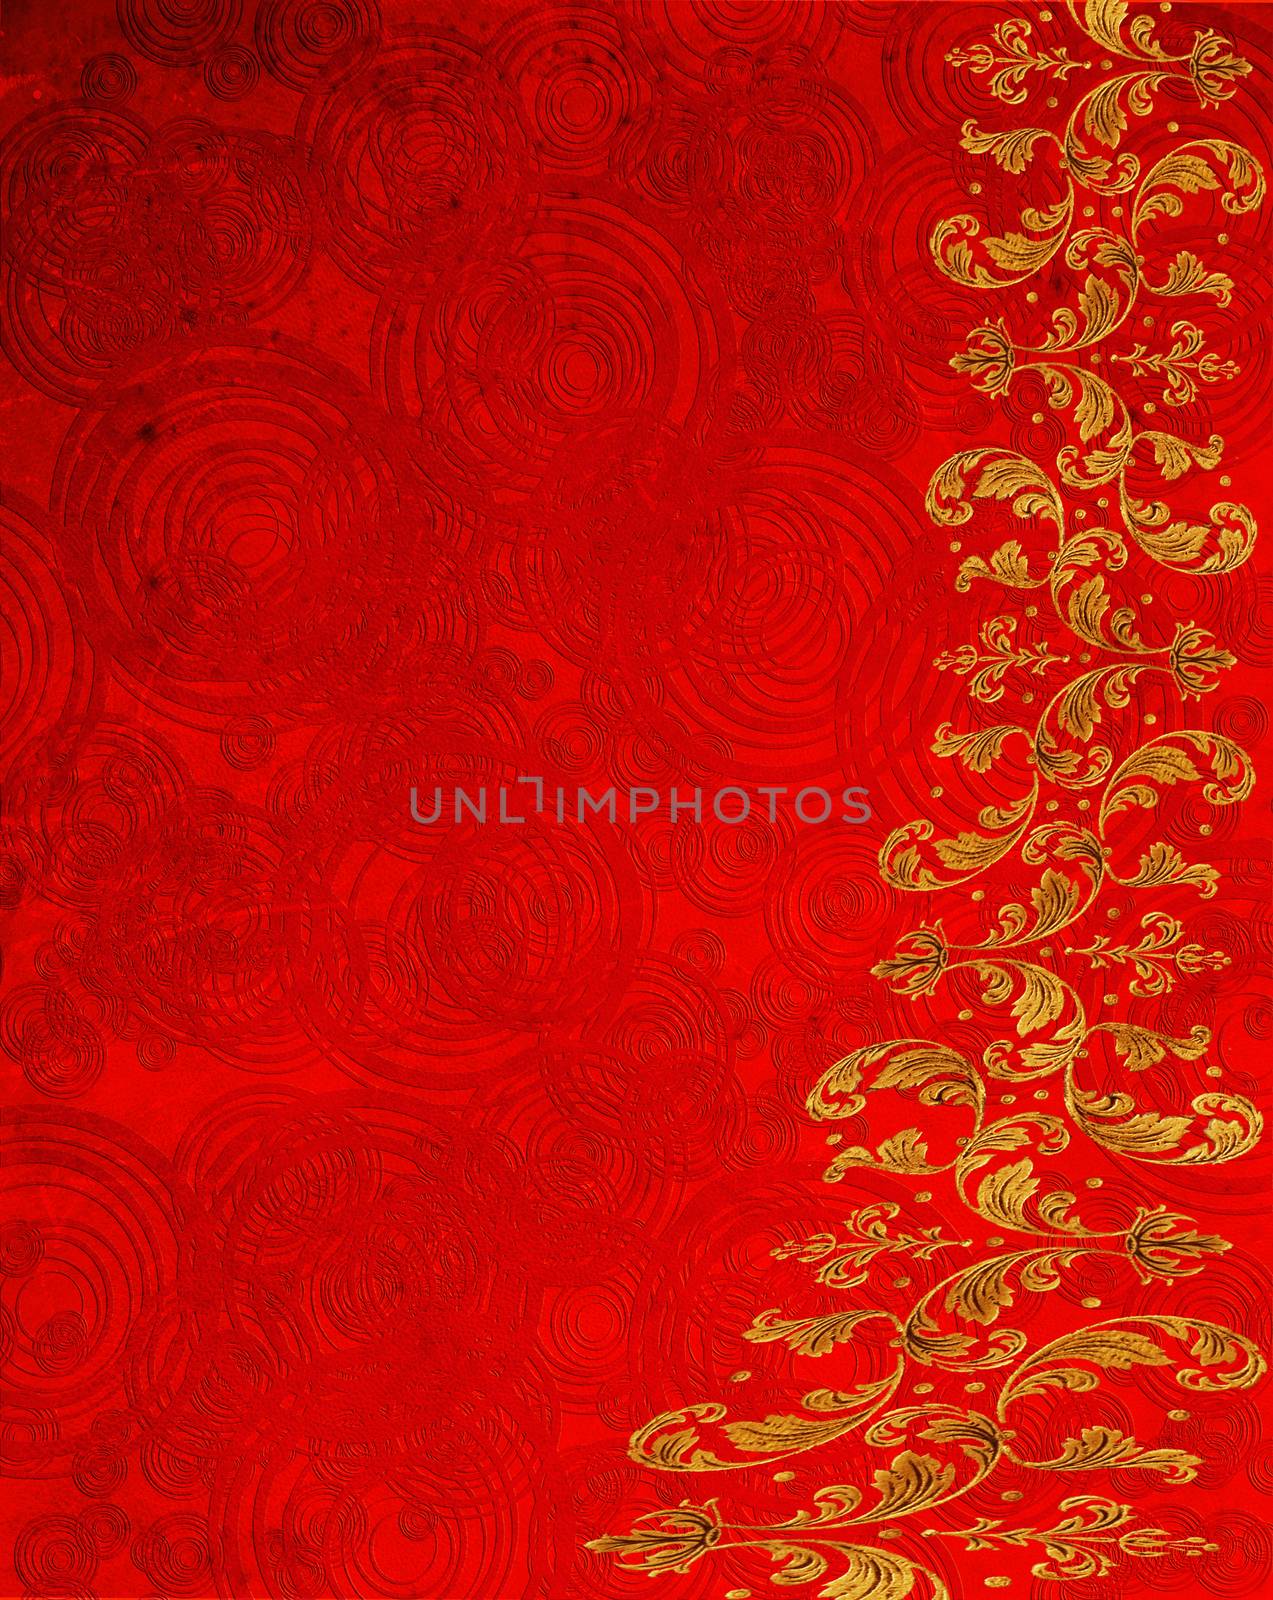 red abstract background with circles and golden floral decoration by sette